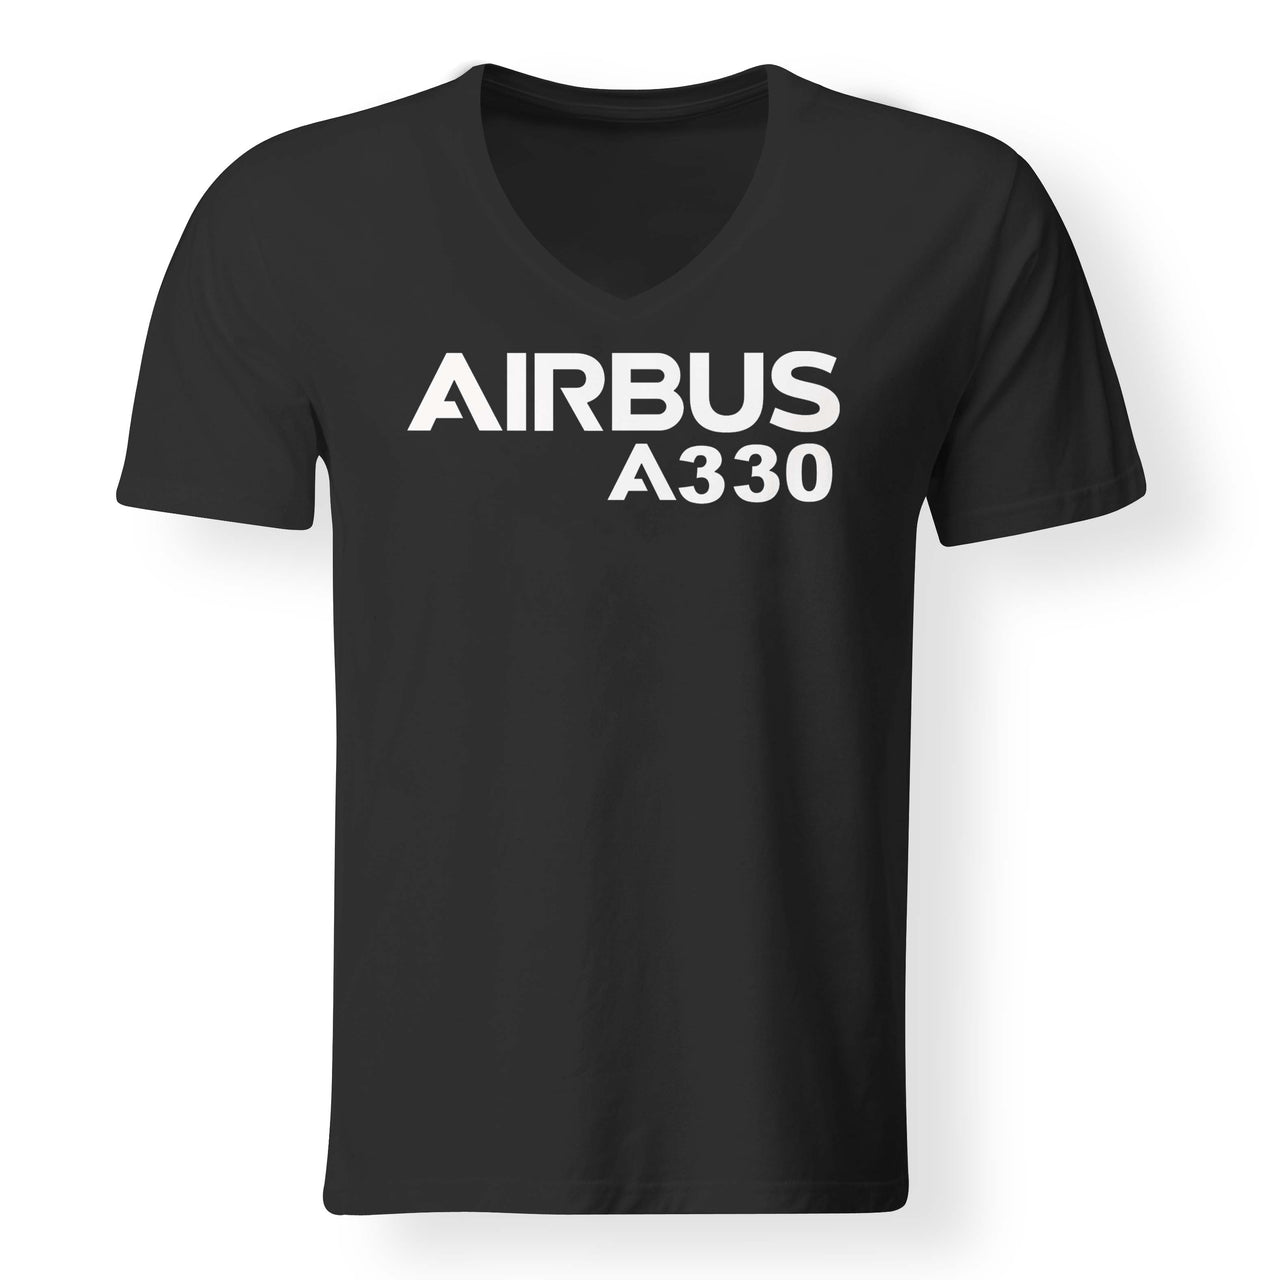 Airbus A330 & Text Designed V-Neck T-Shirts